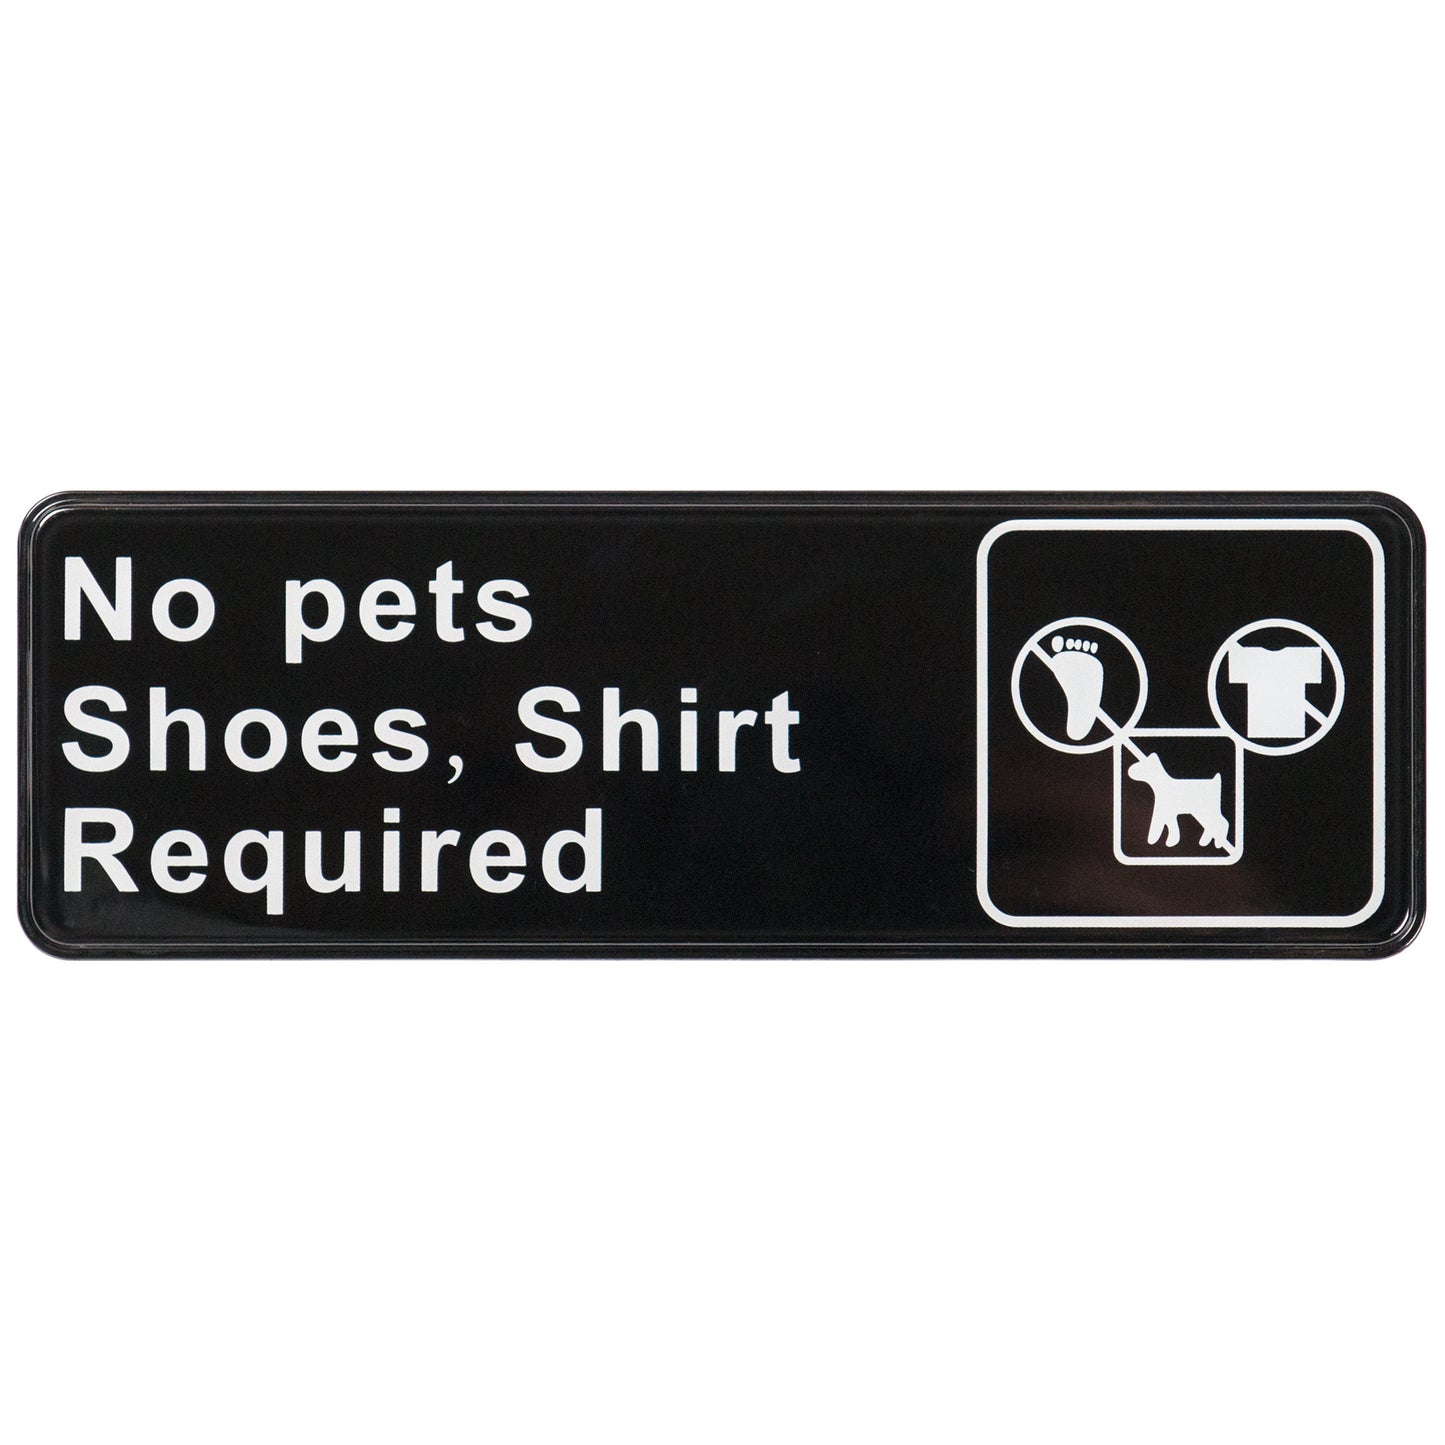 SGN-332 - Information Signs, 9"W x 3"H - SGN-332 - No Pets/Shoes Shirt Required